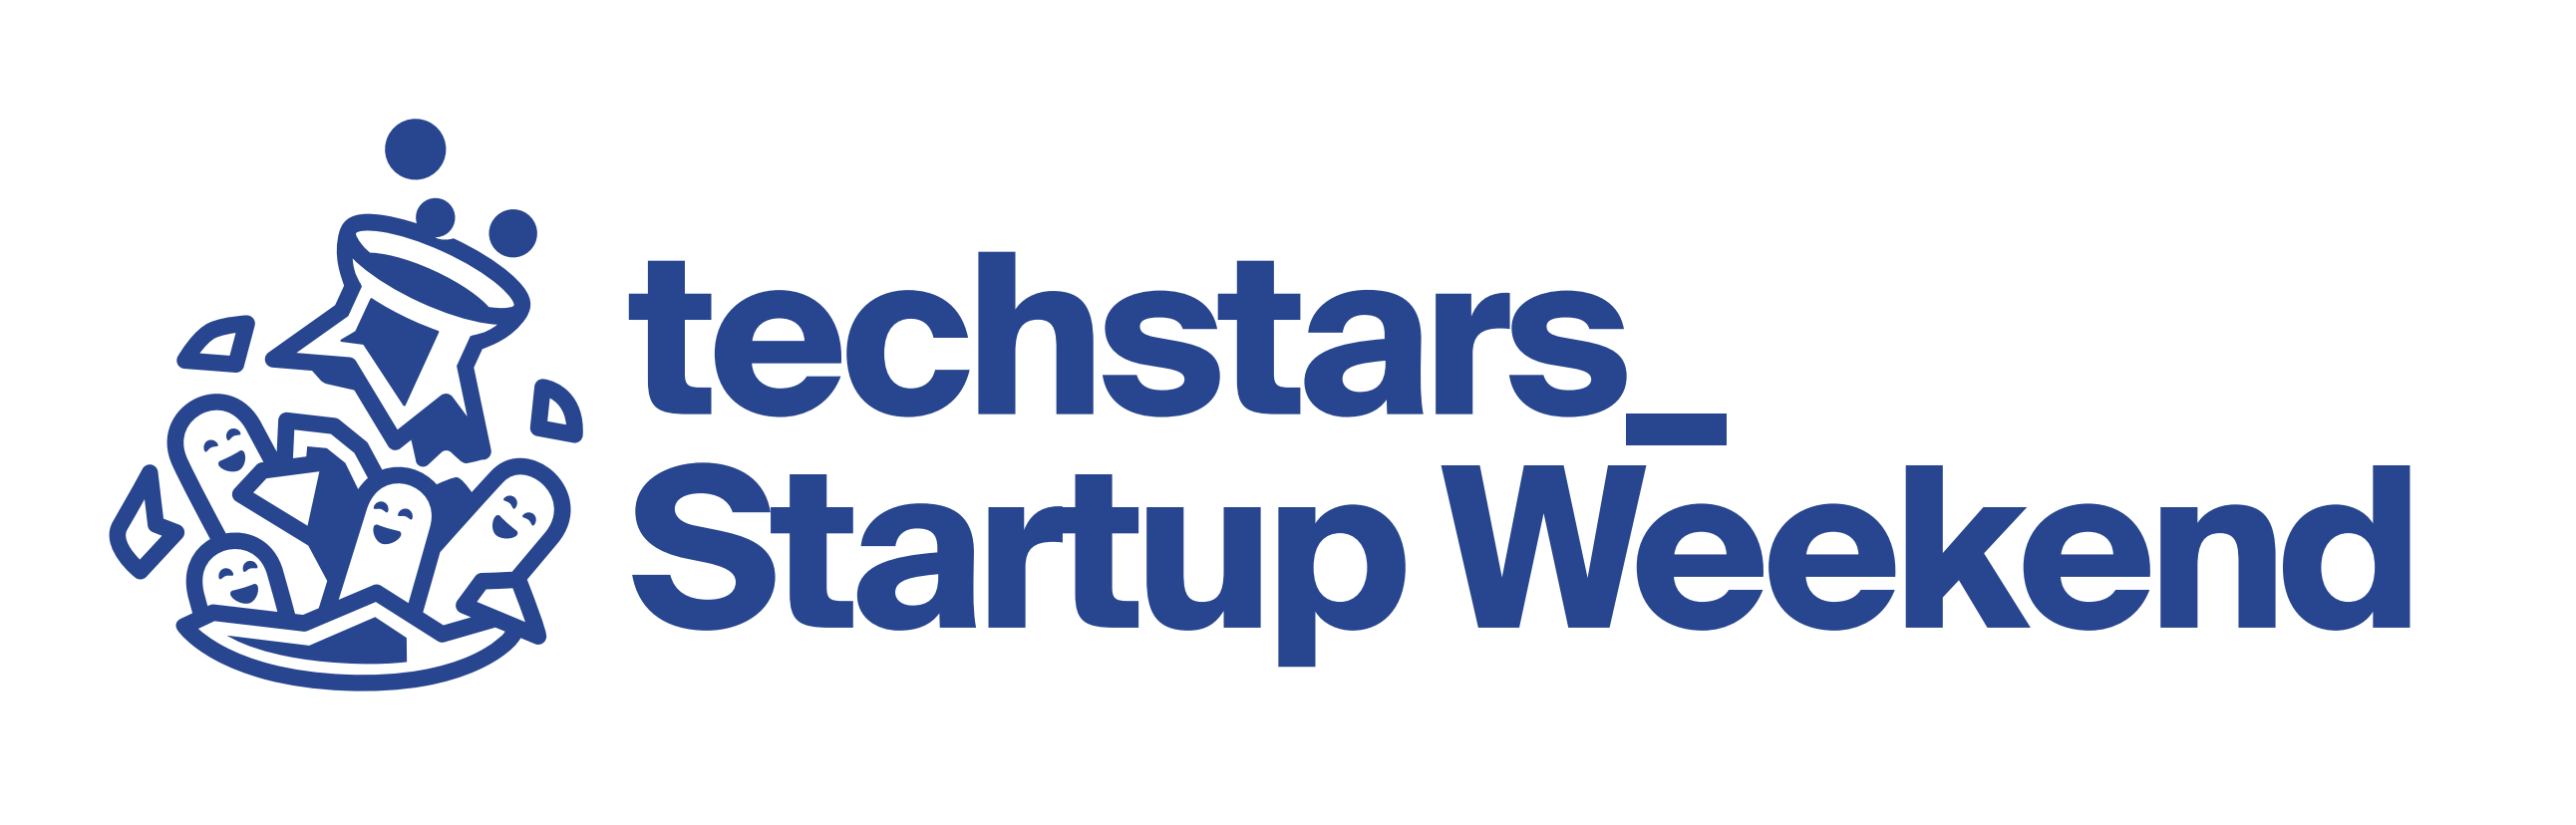 Startup Weekend Tours